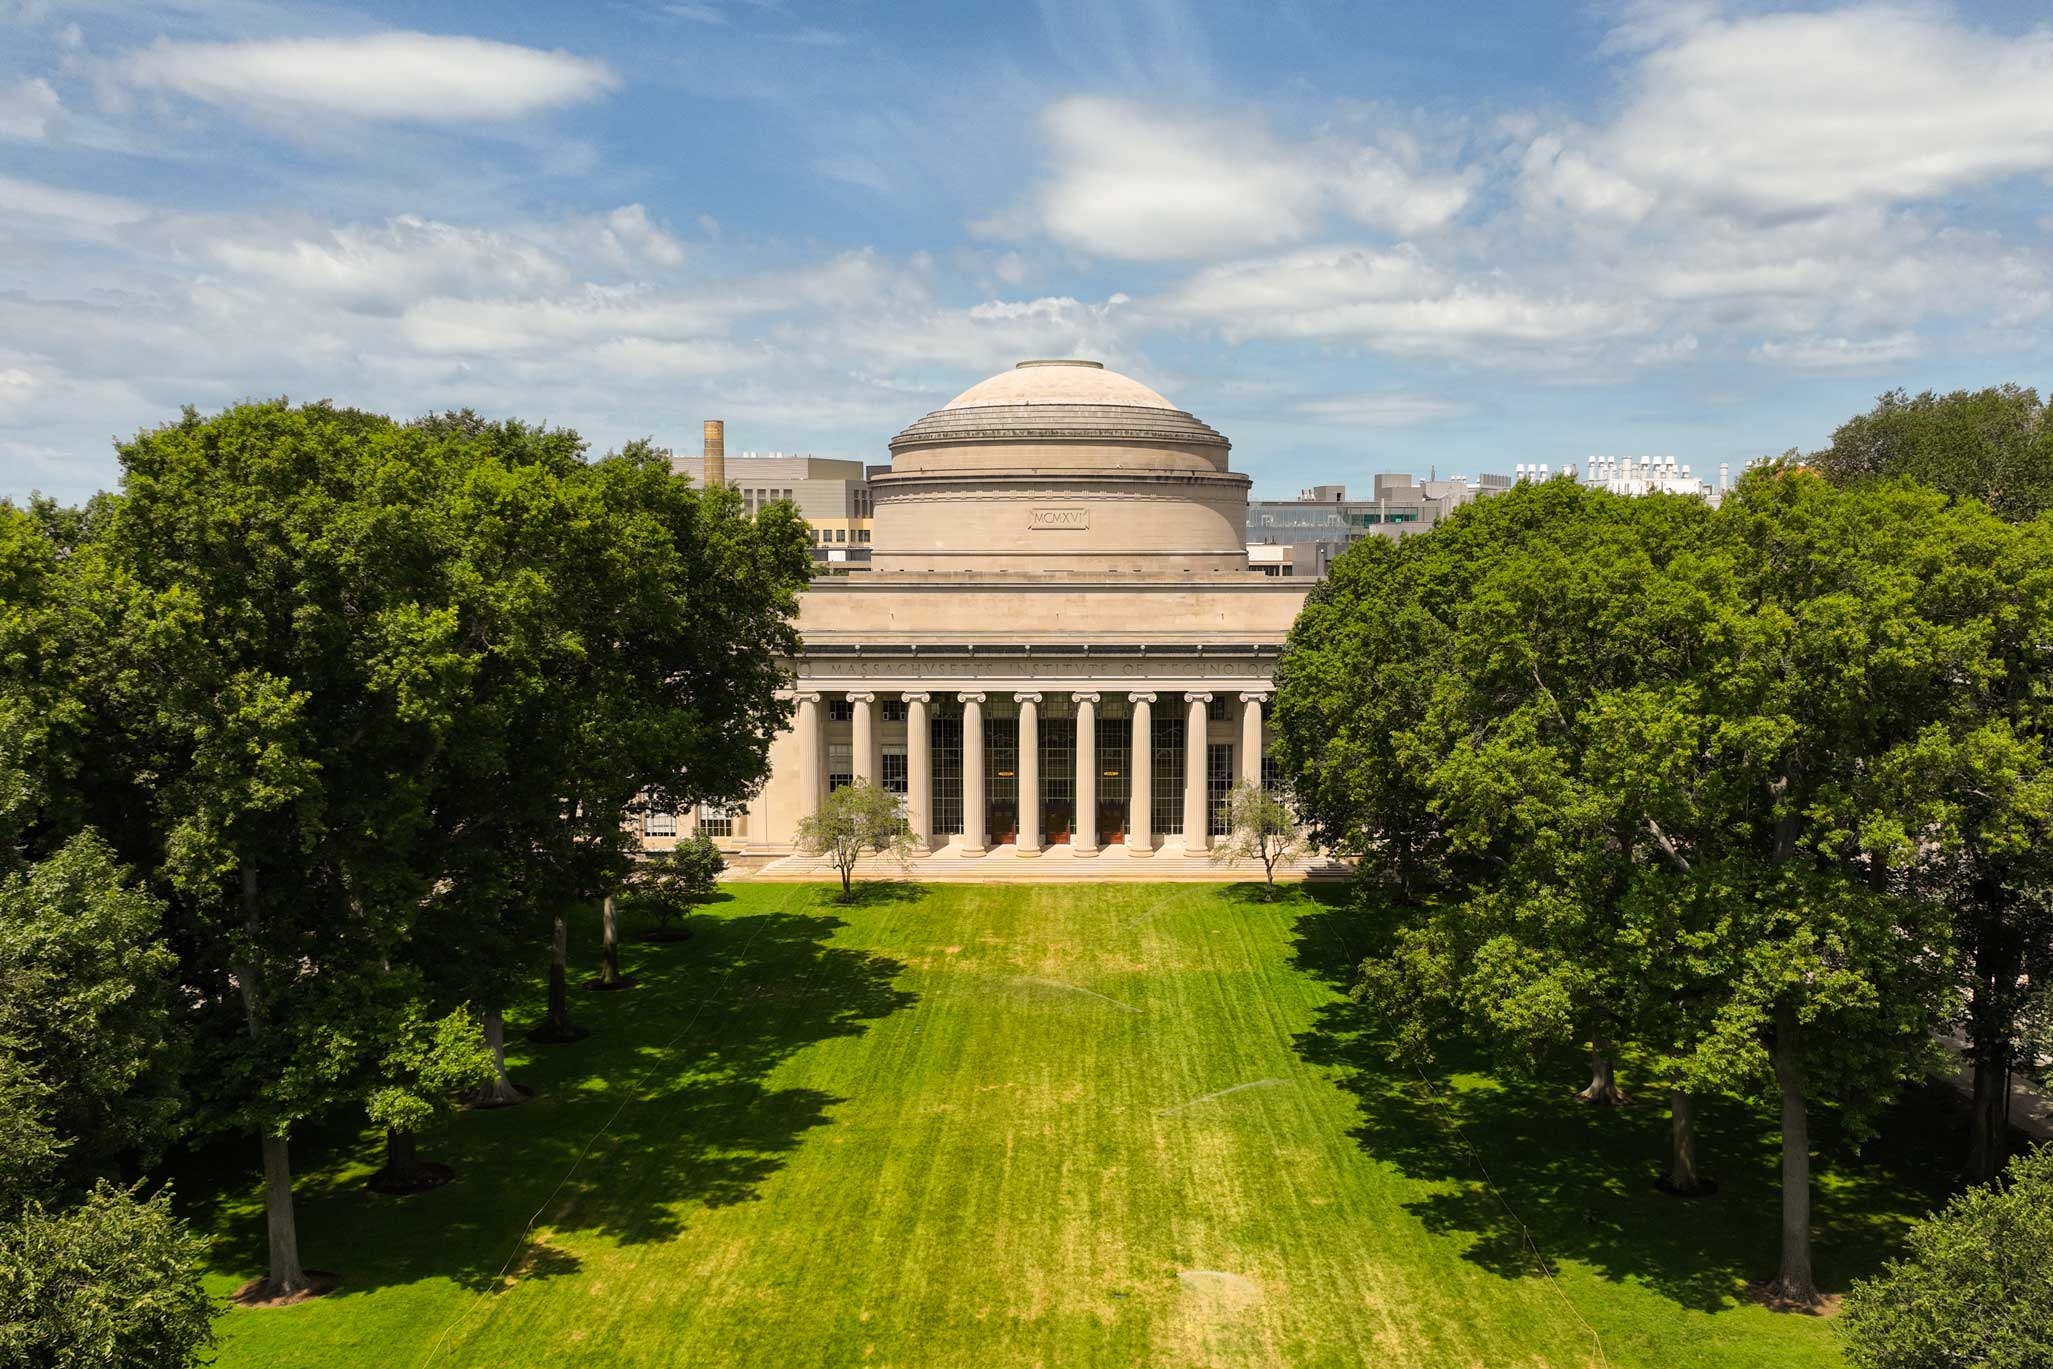 As in past years, MIT’s engineering program continues to lead the list of undergraduate engineering programs at a doctoral institution. The Institute also placed first in five out of 10 engineering disciplines.